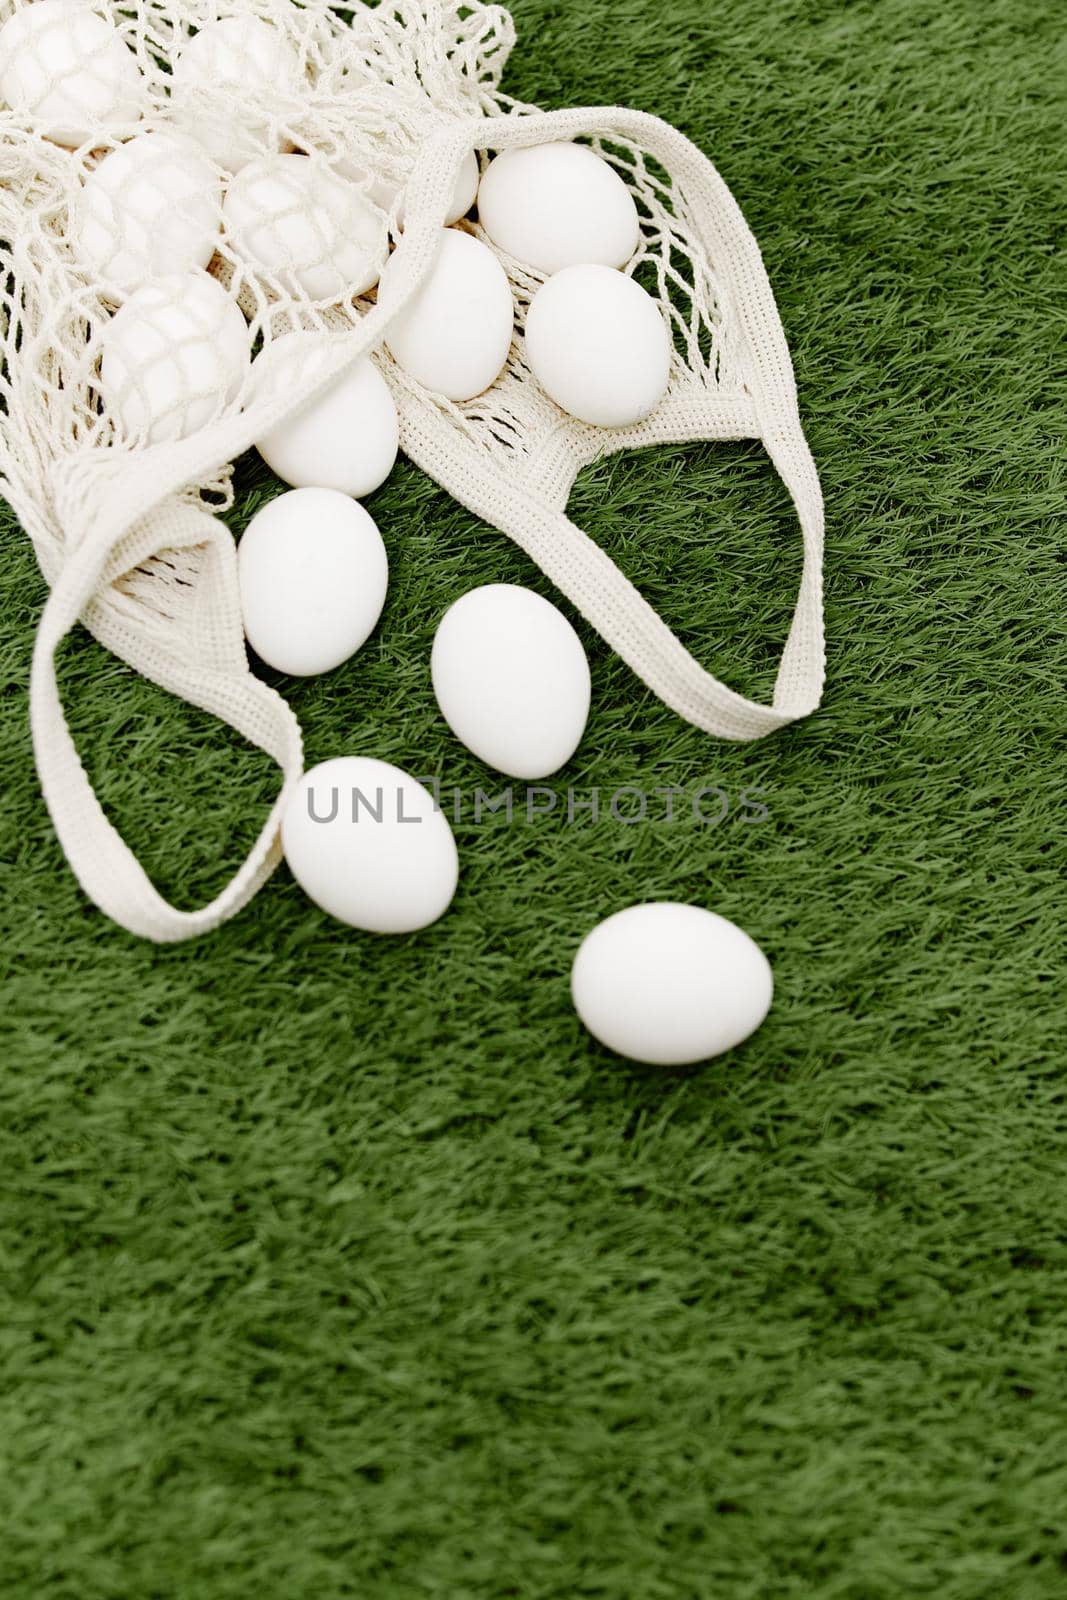 bag of white eggs chicken farm decoration top view. High quality photo